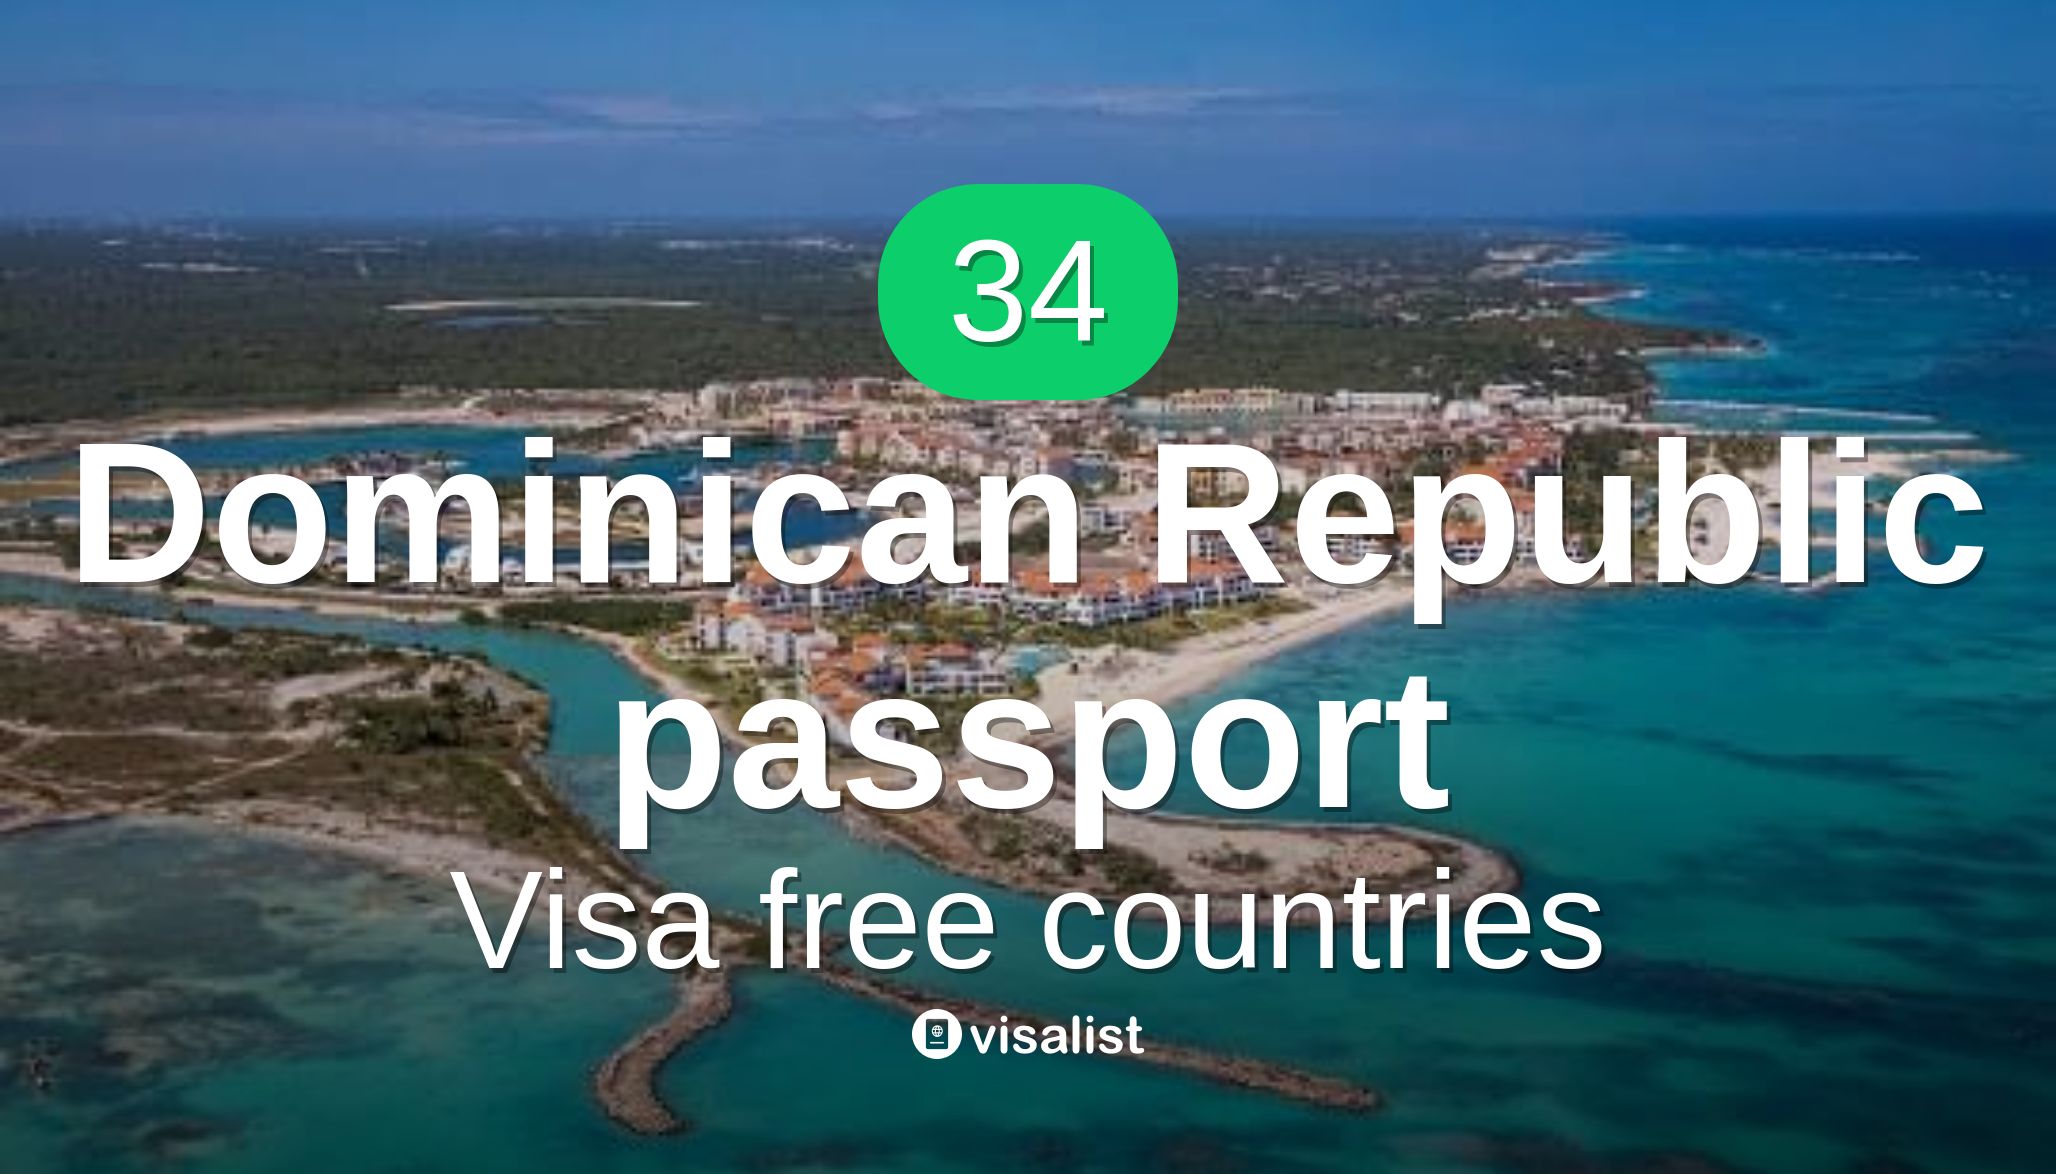 dominican can travel without visa